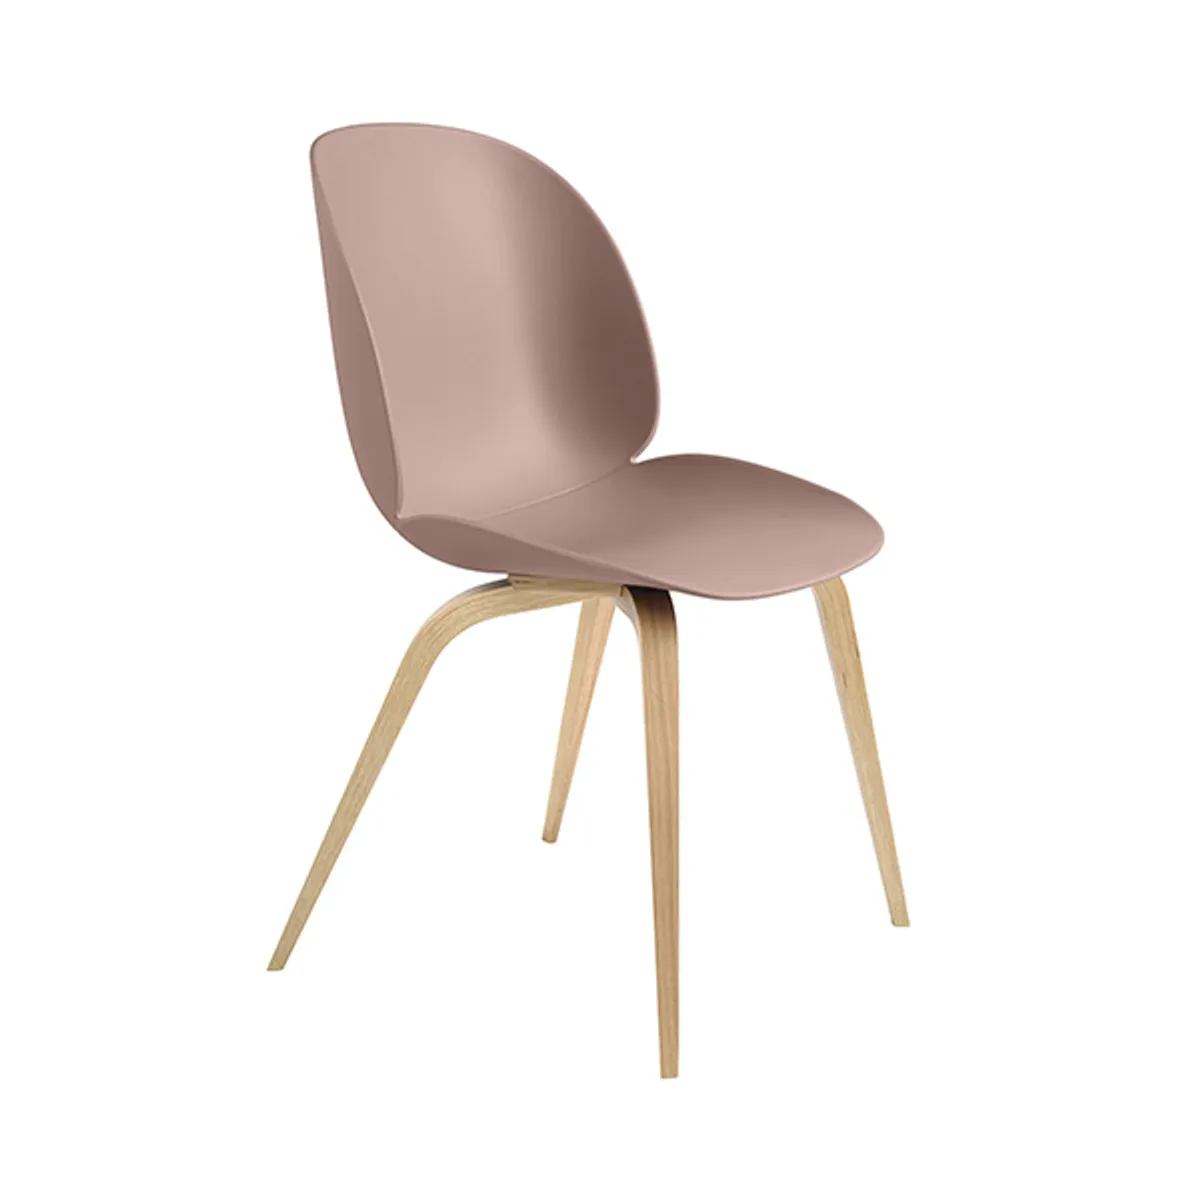 Beetle Side Chair Wooden Legs Poly Seat Dustypink Inside Out Contracts Jp